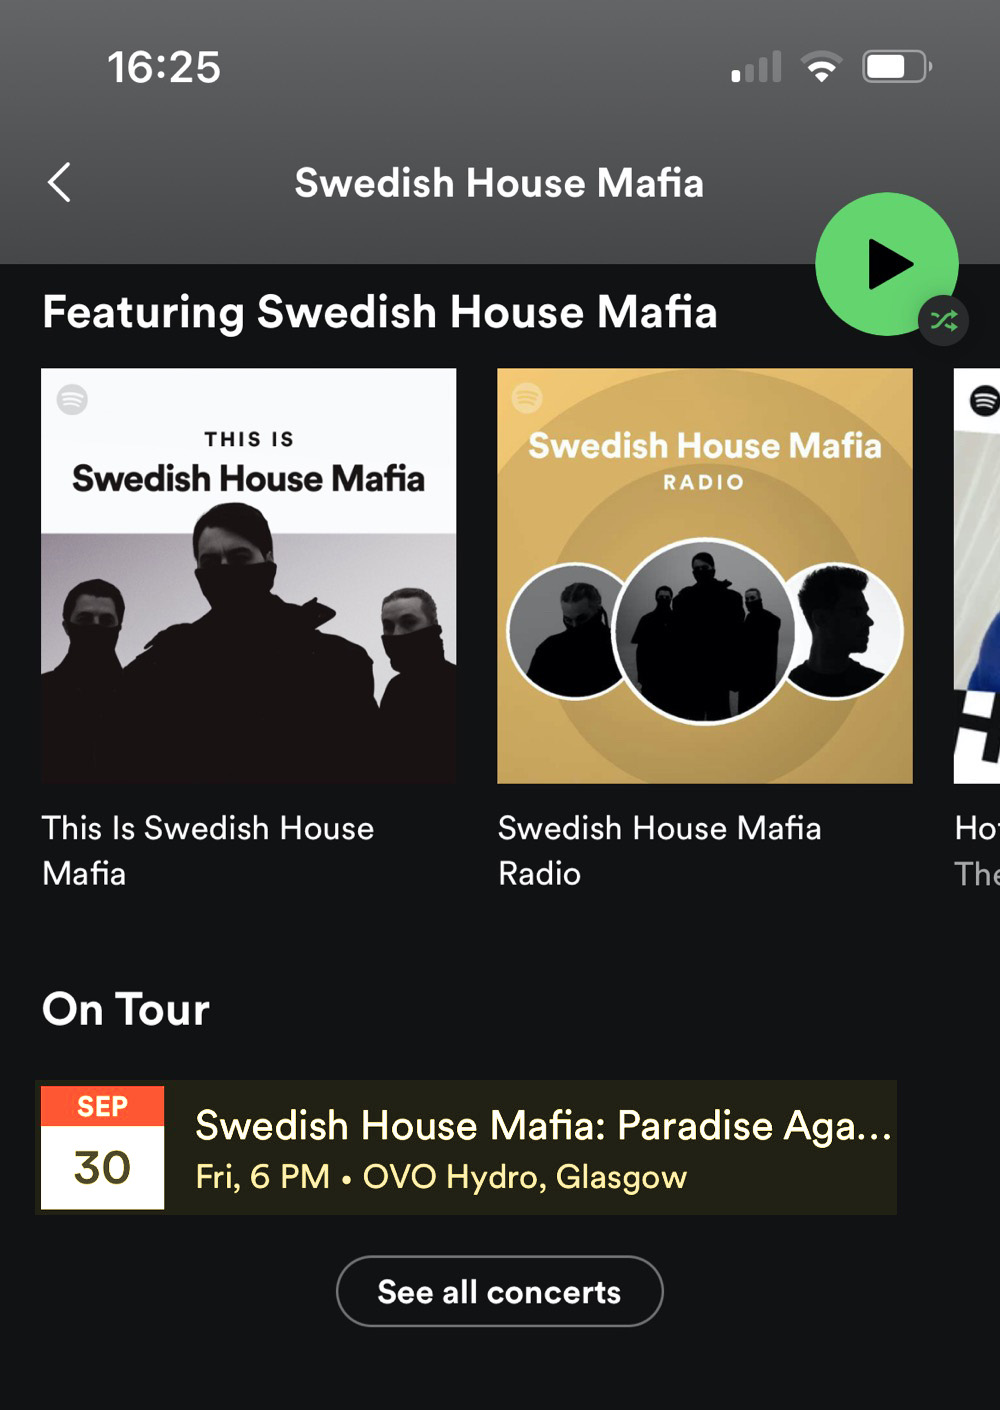 Event listed on Spotify profile
